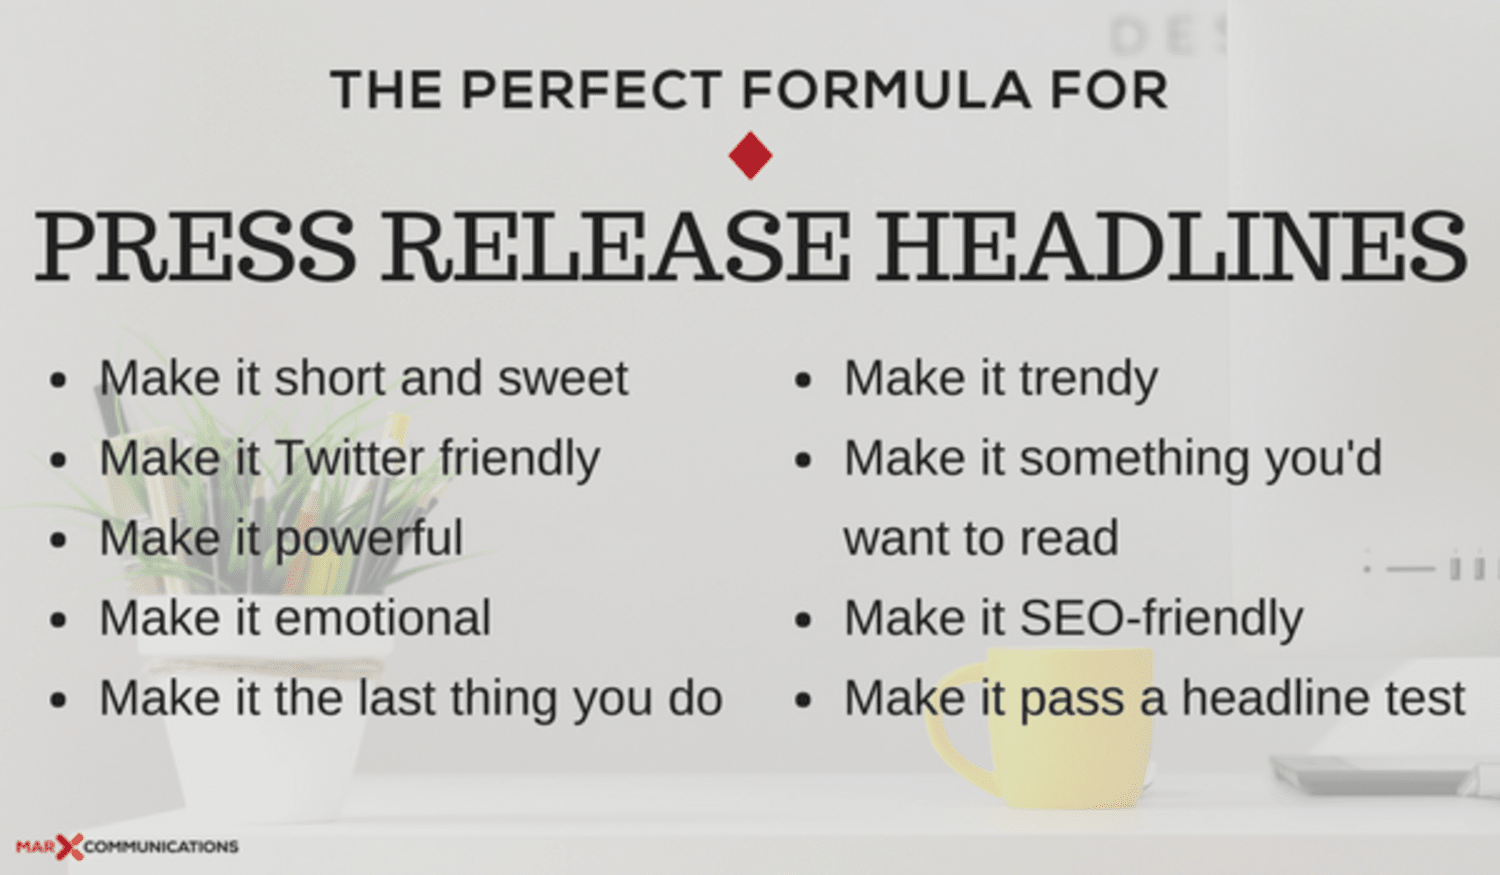 List of the key formula for creating press release headline